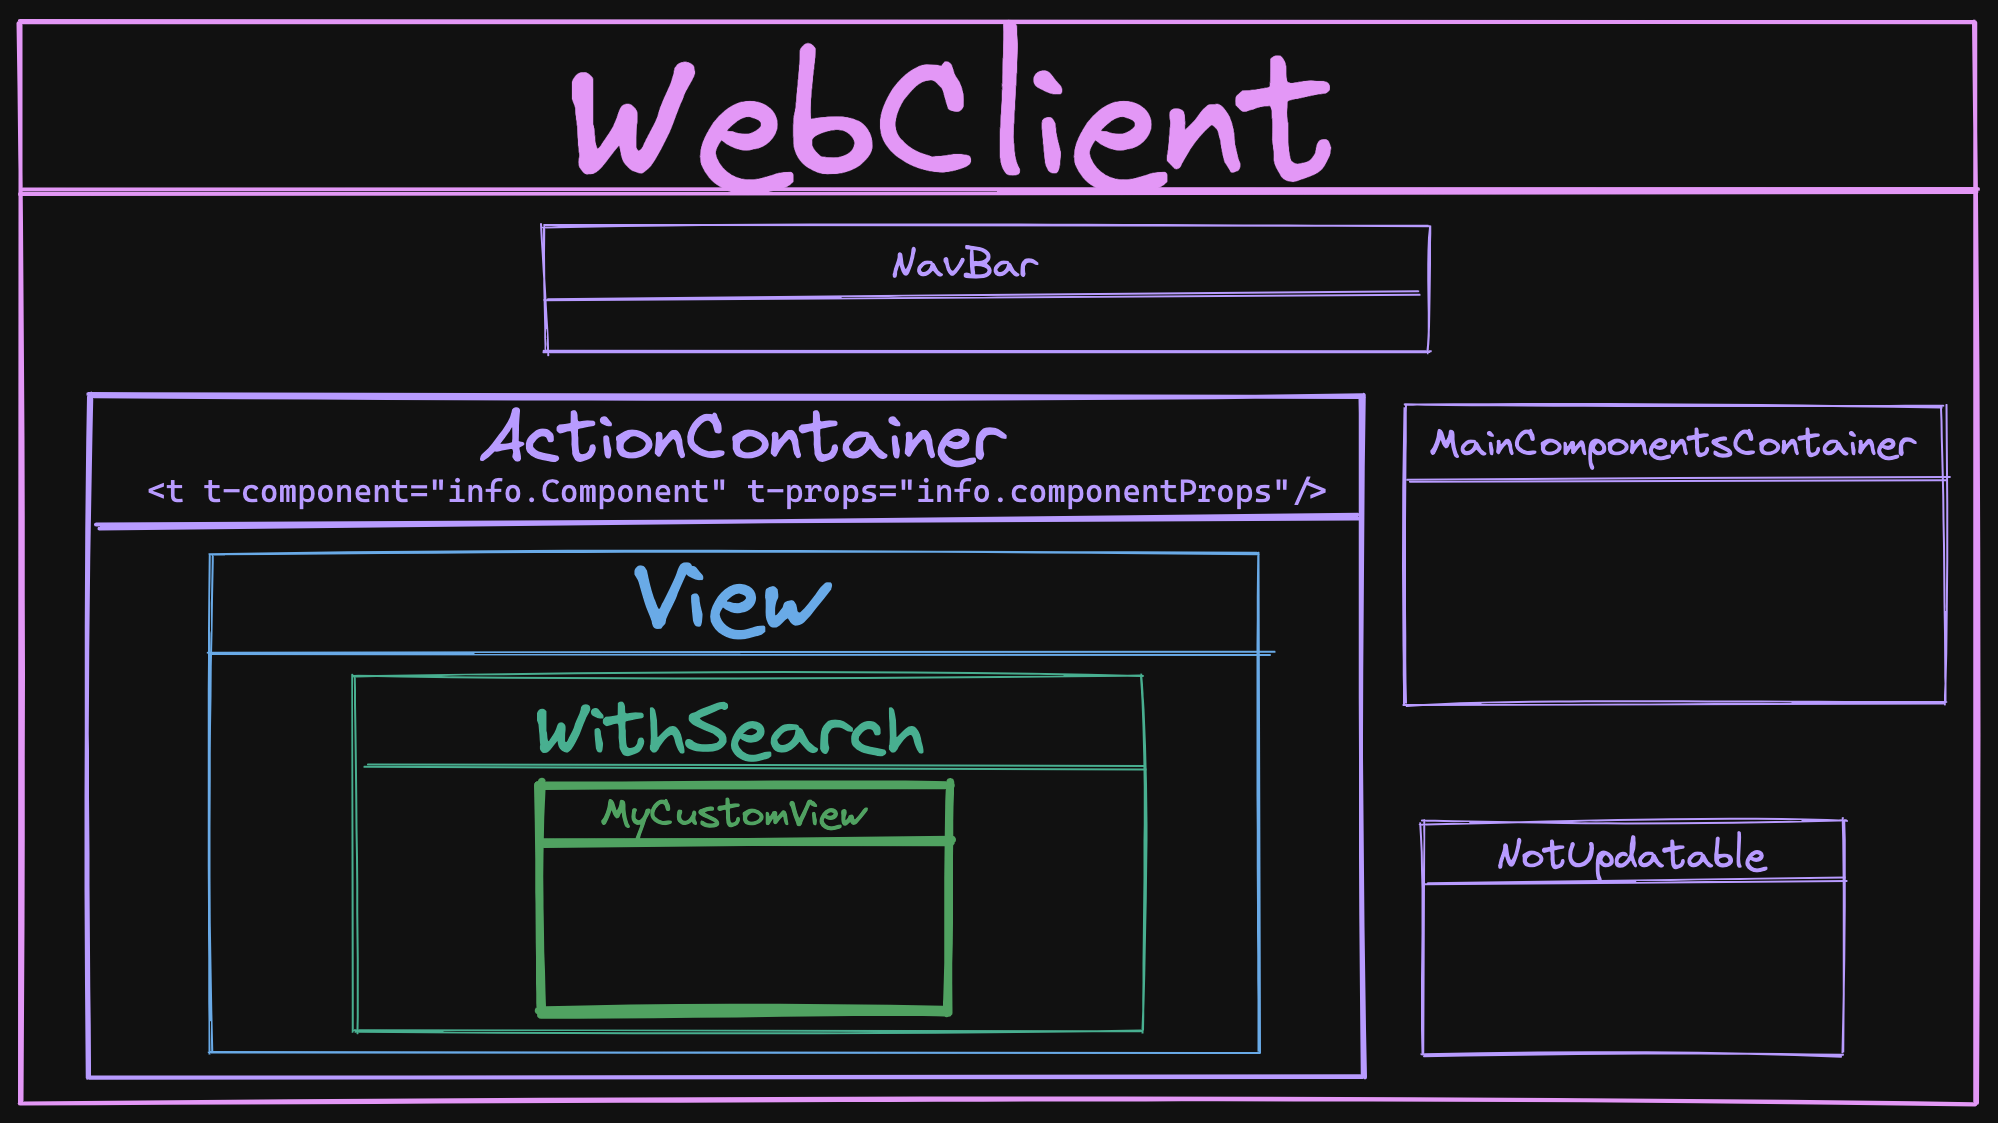 Odoo 15 WebClient Architecture